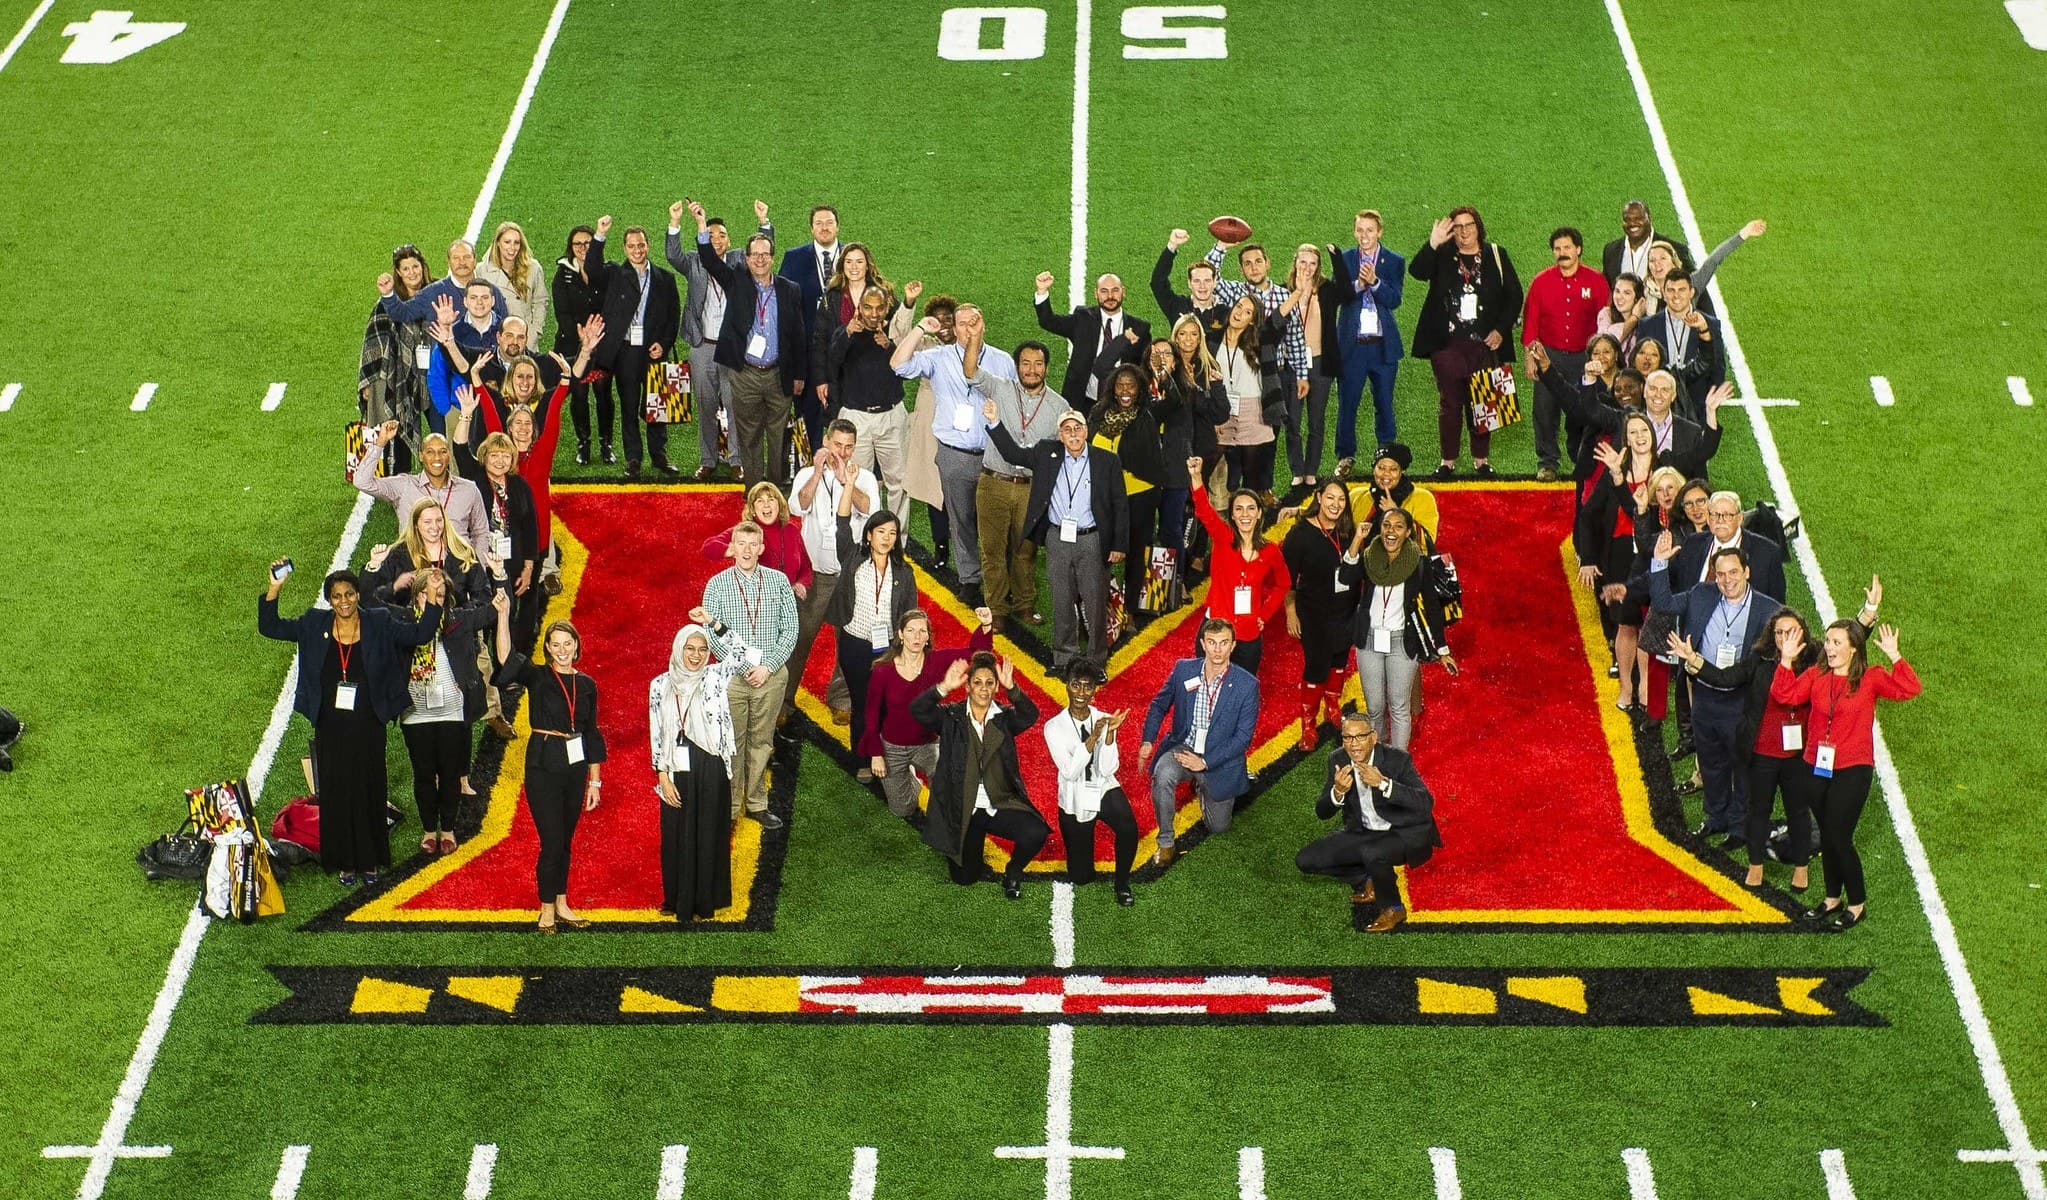 People standing on the Maryland logo